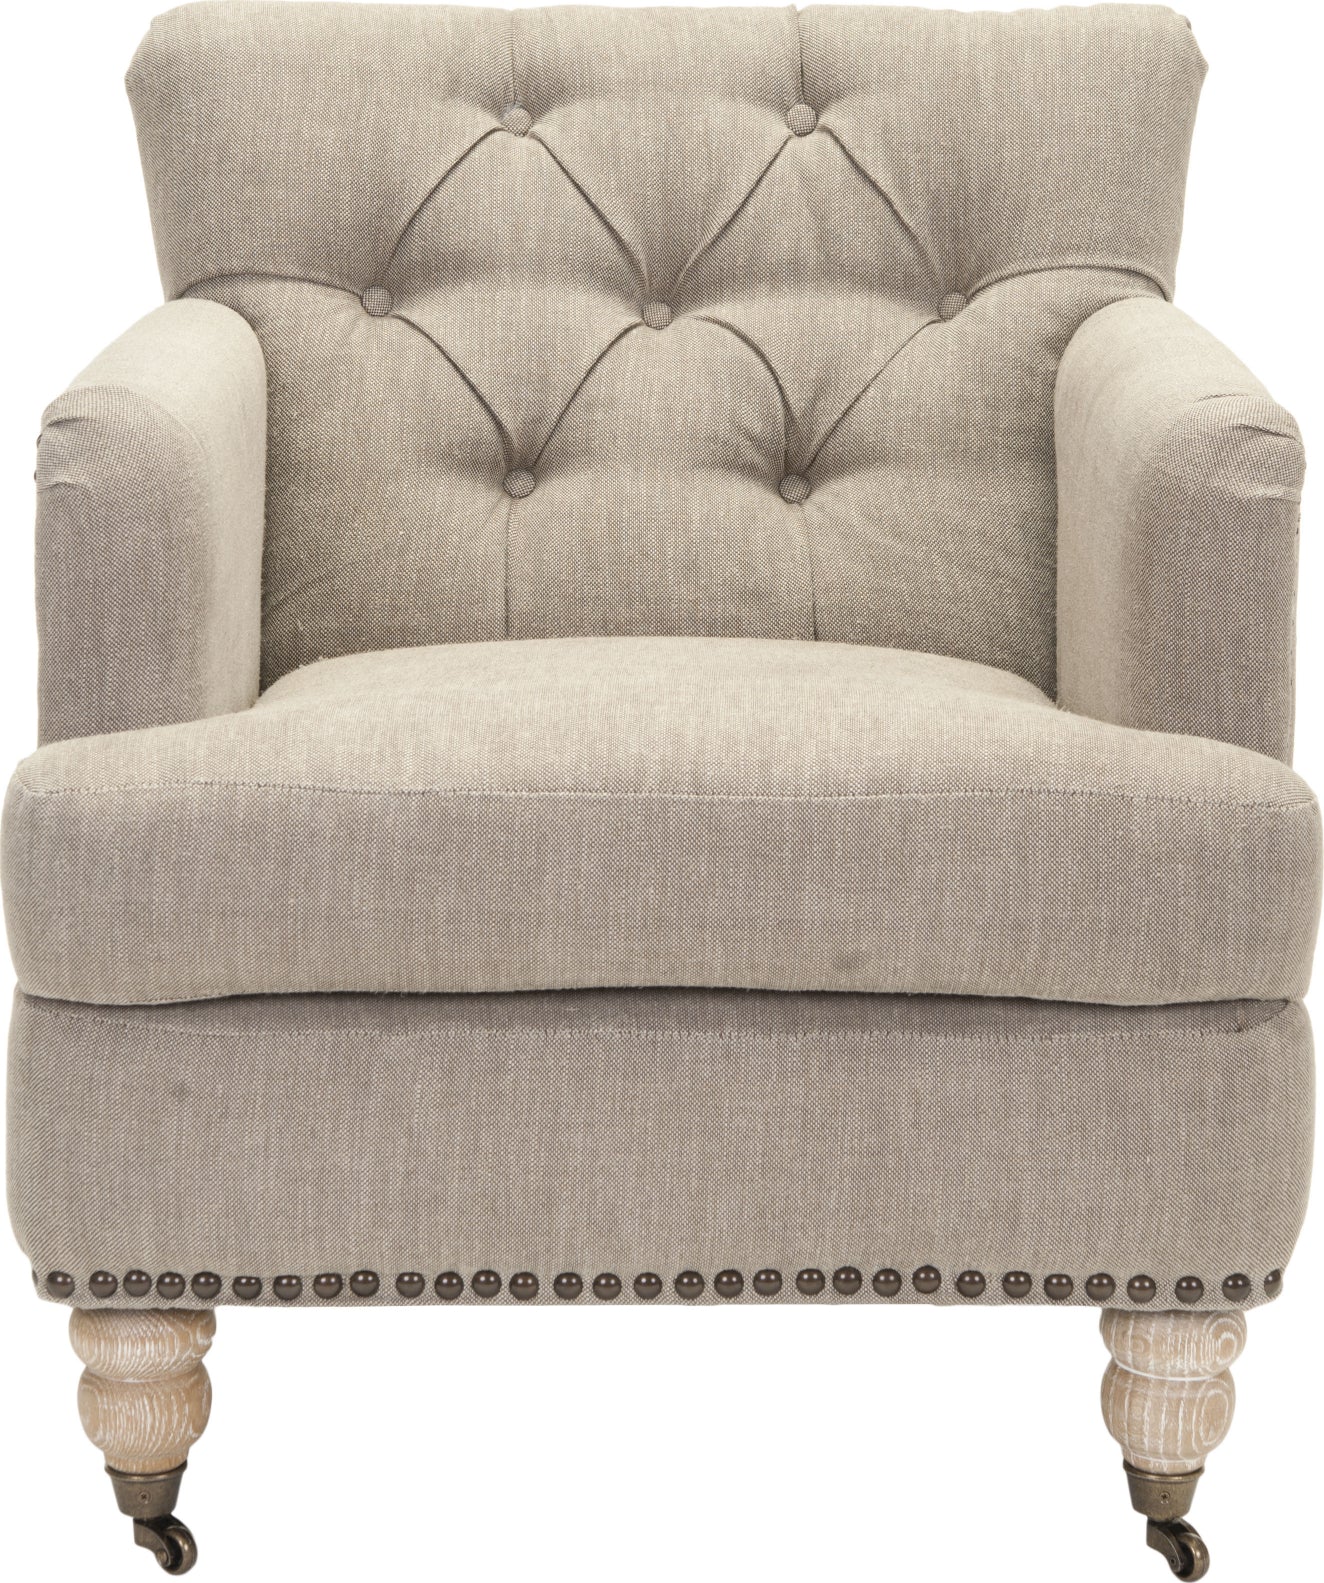 Safavieh Colin Tufted Club Chair With Brass Nail Heads Taupe and White Wash Furniture main image